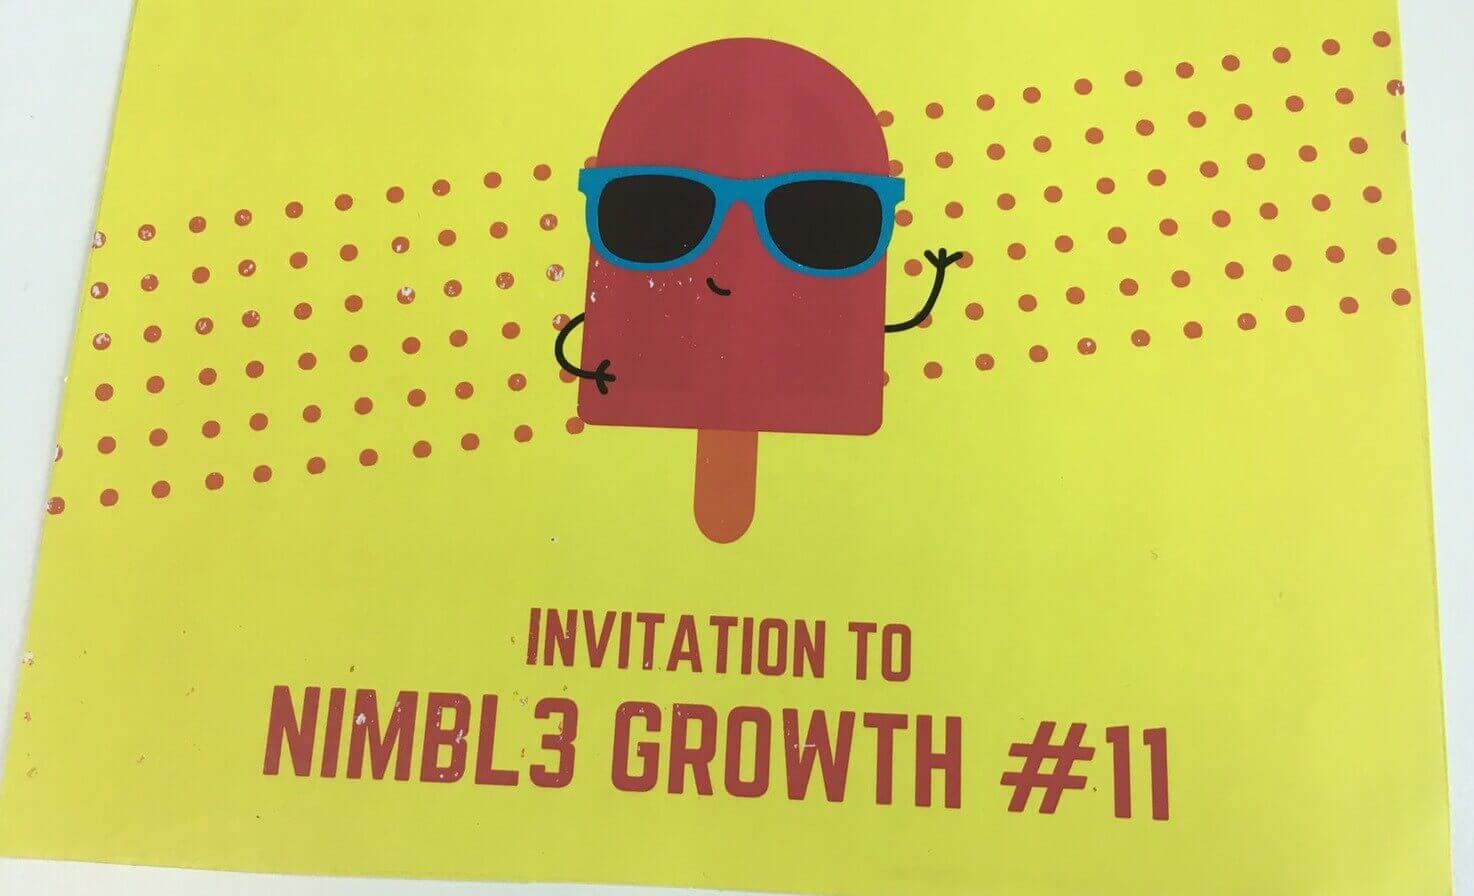 Even if NIMBLE GROWTH #10 was my last one as an intern, I still got the invitation for the next one too 😆